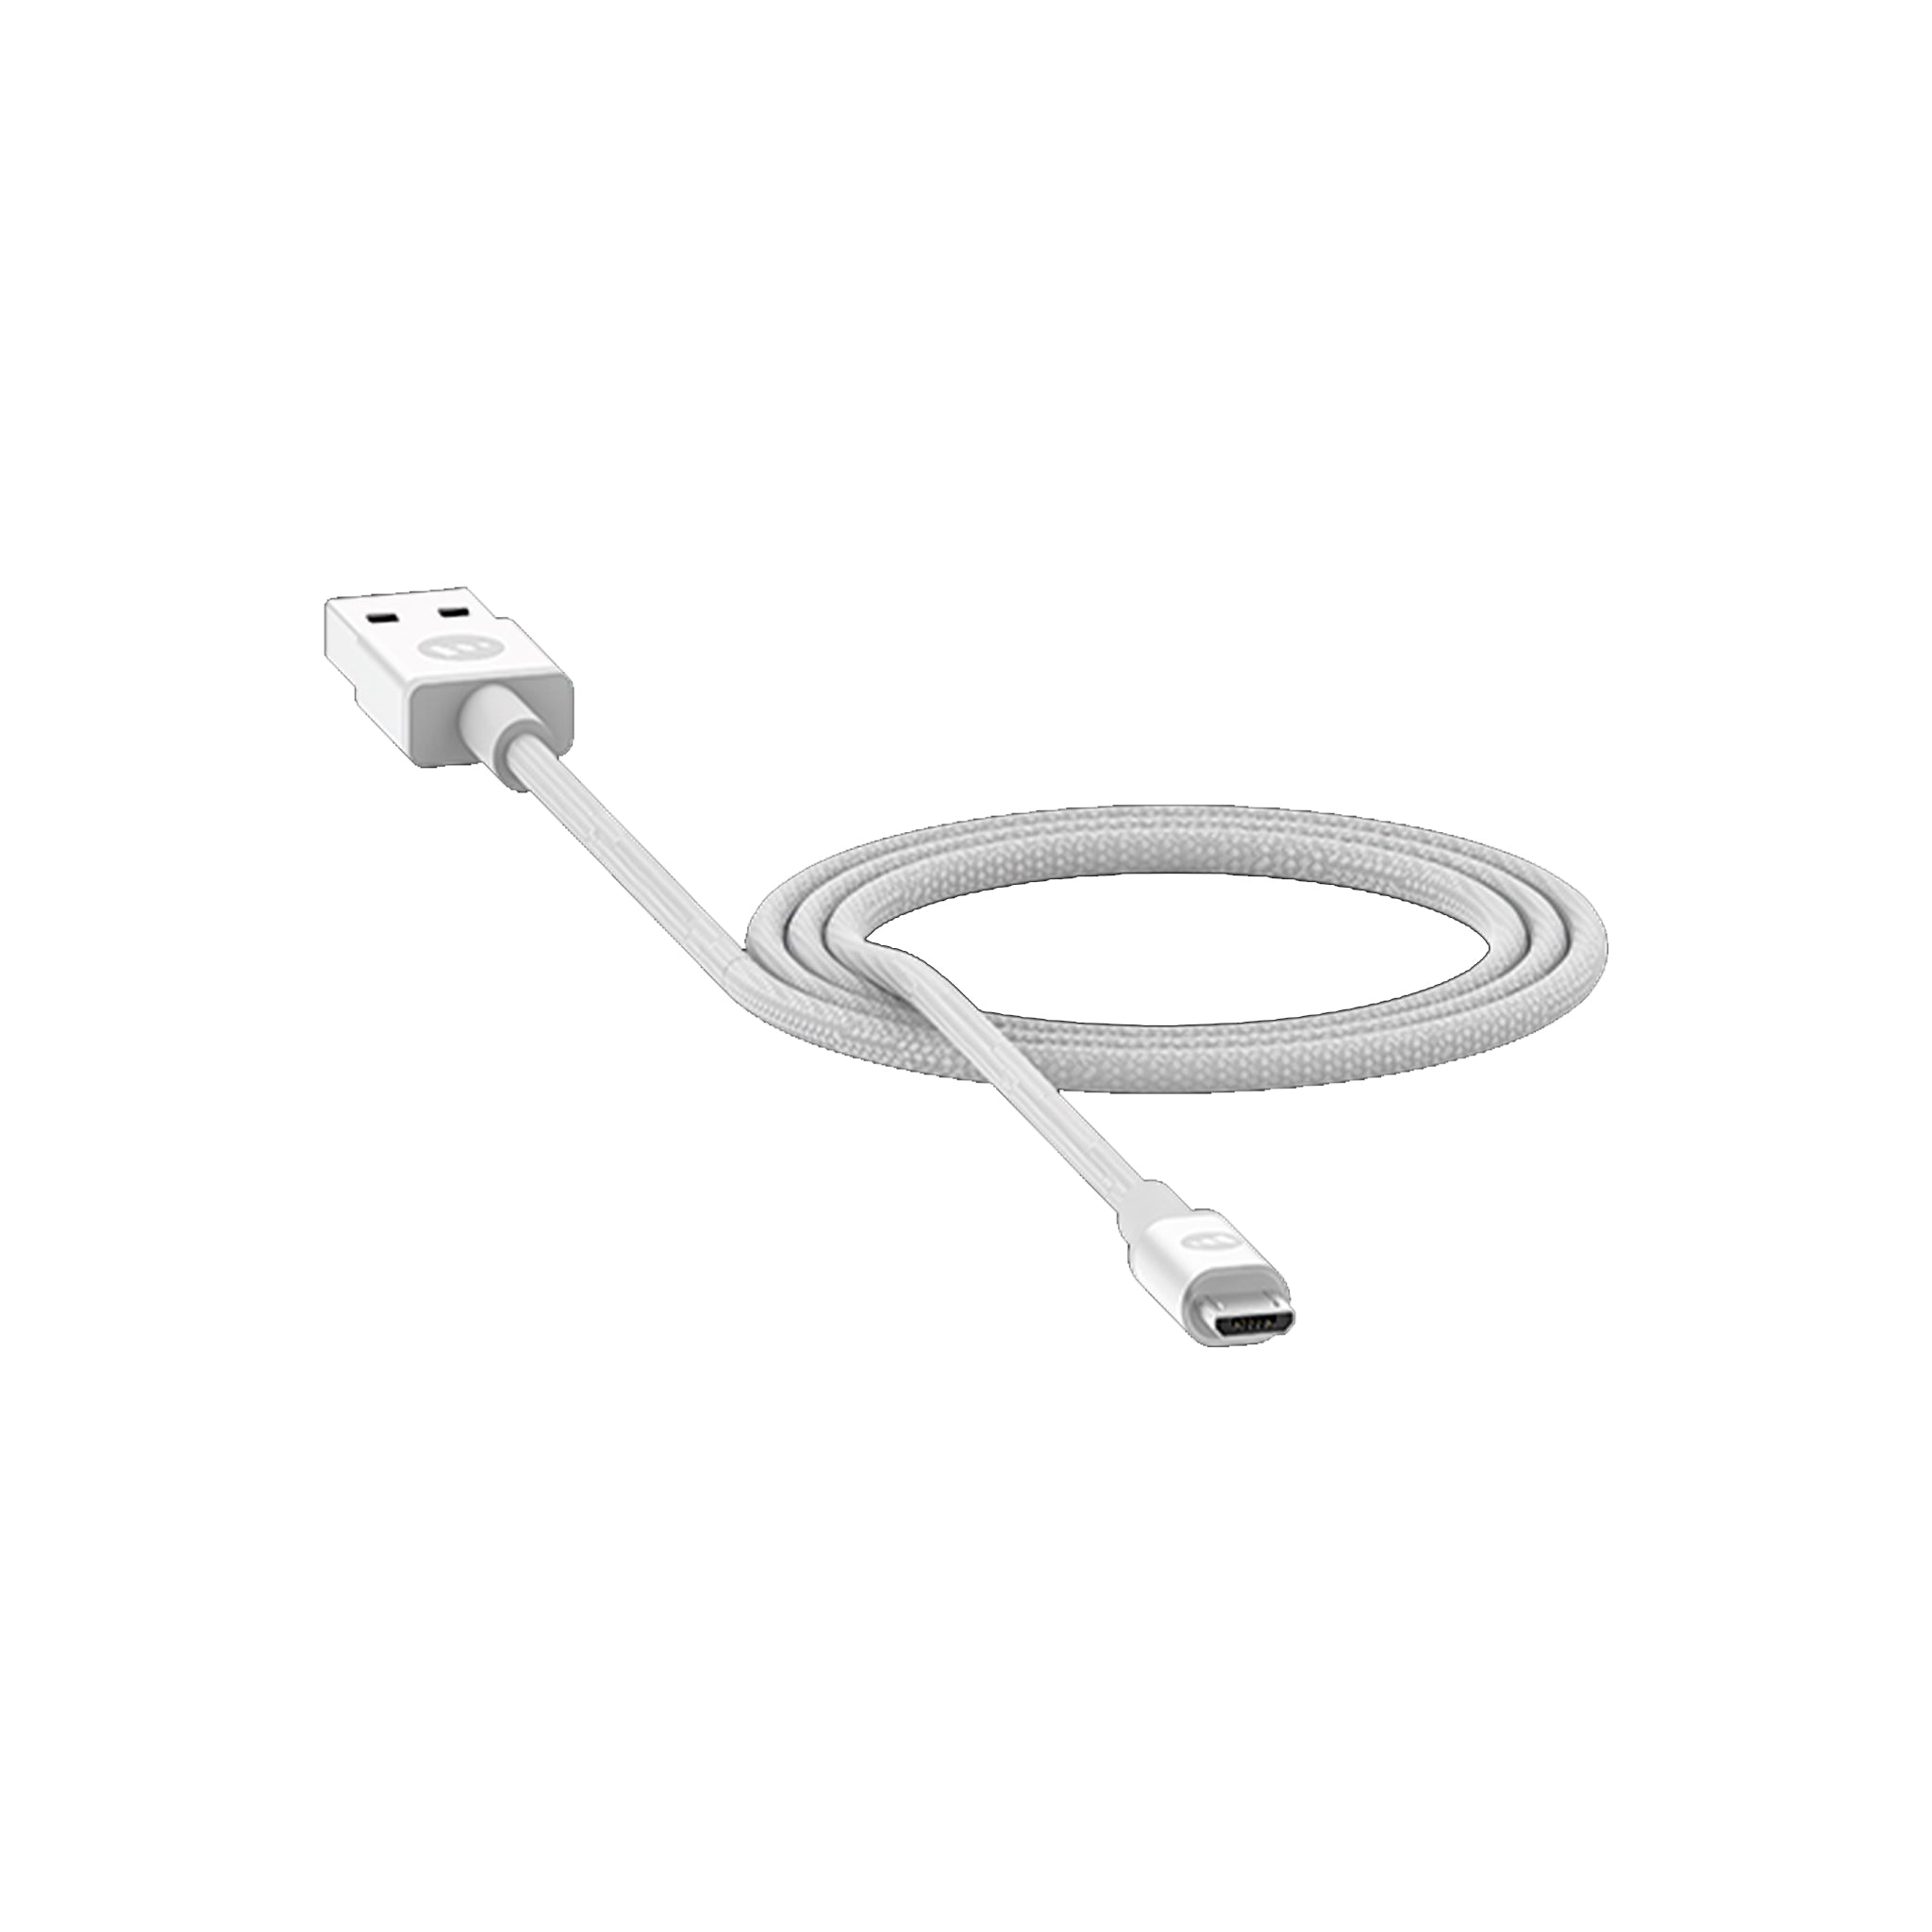 Mophie - Micro Usb Cable 3ft - White